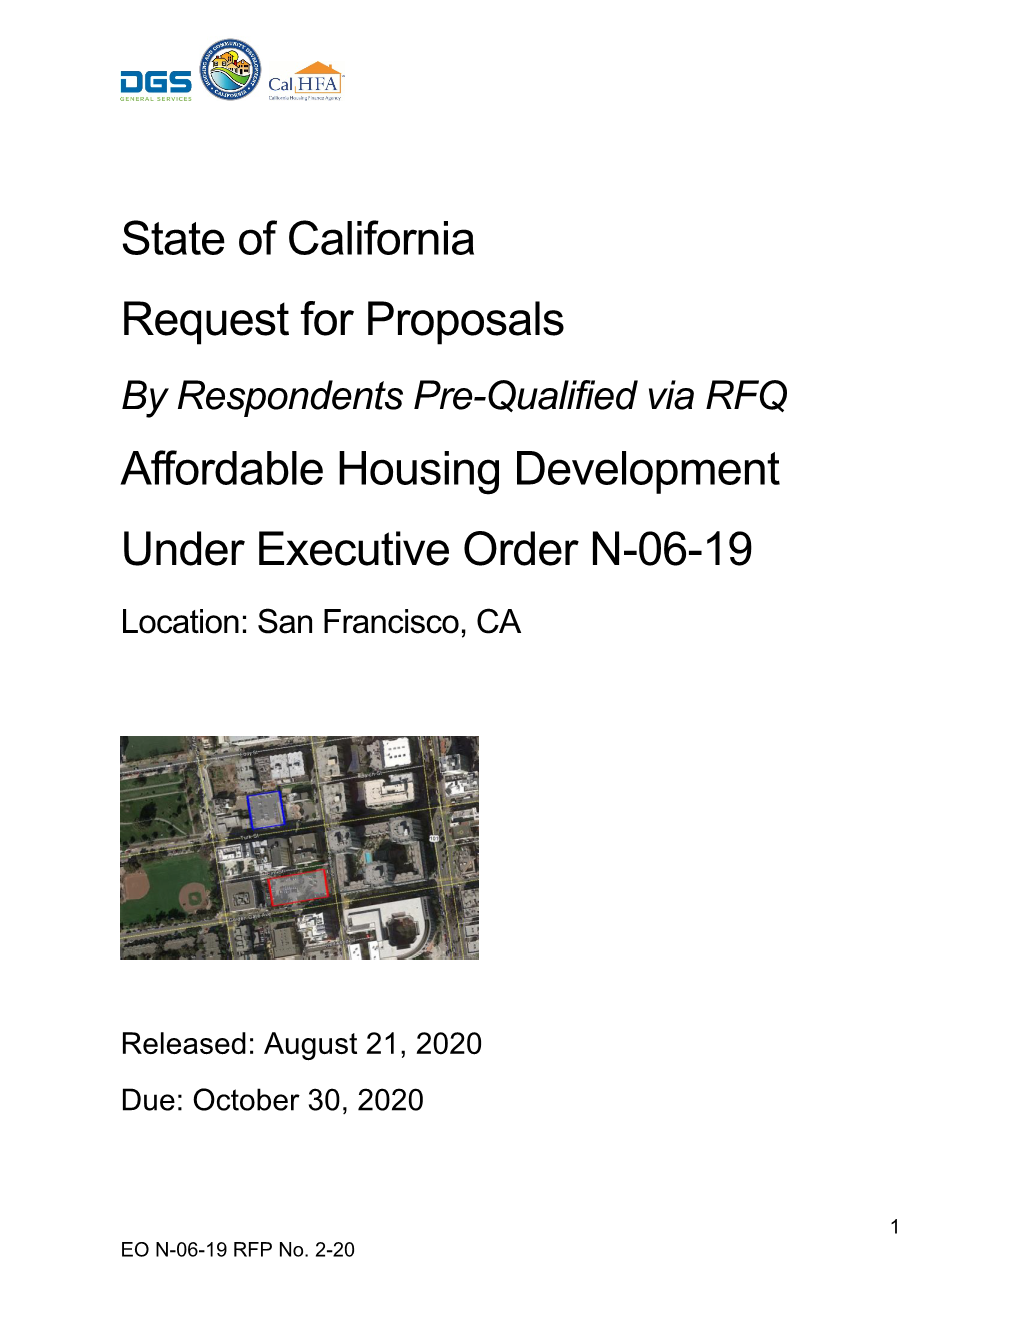 San Francisco Affordable Housing Project